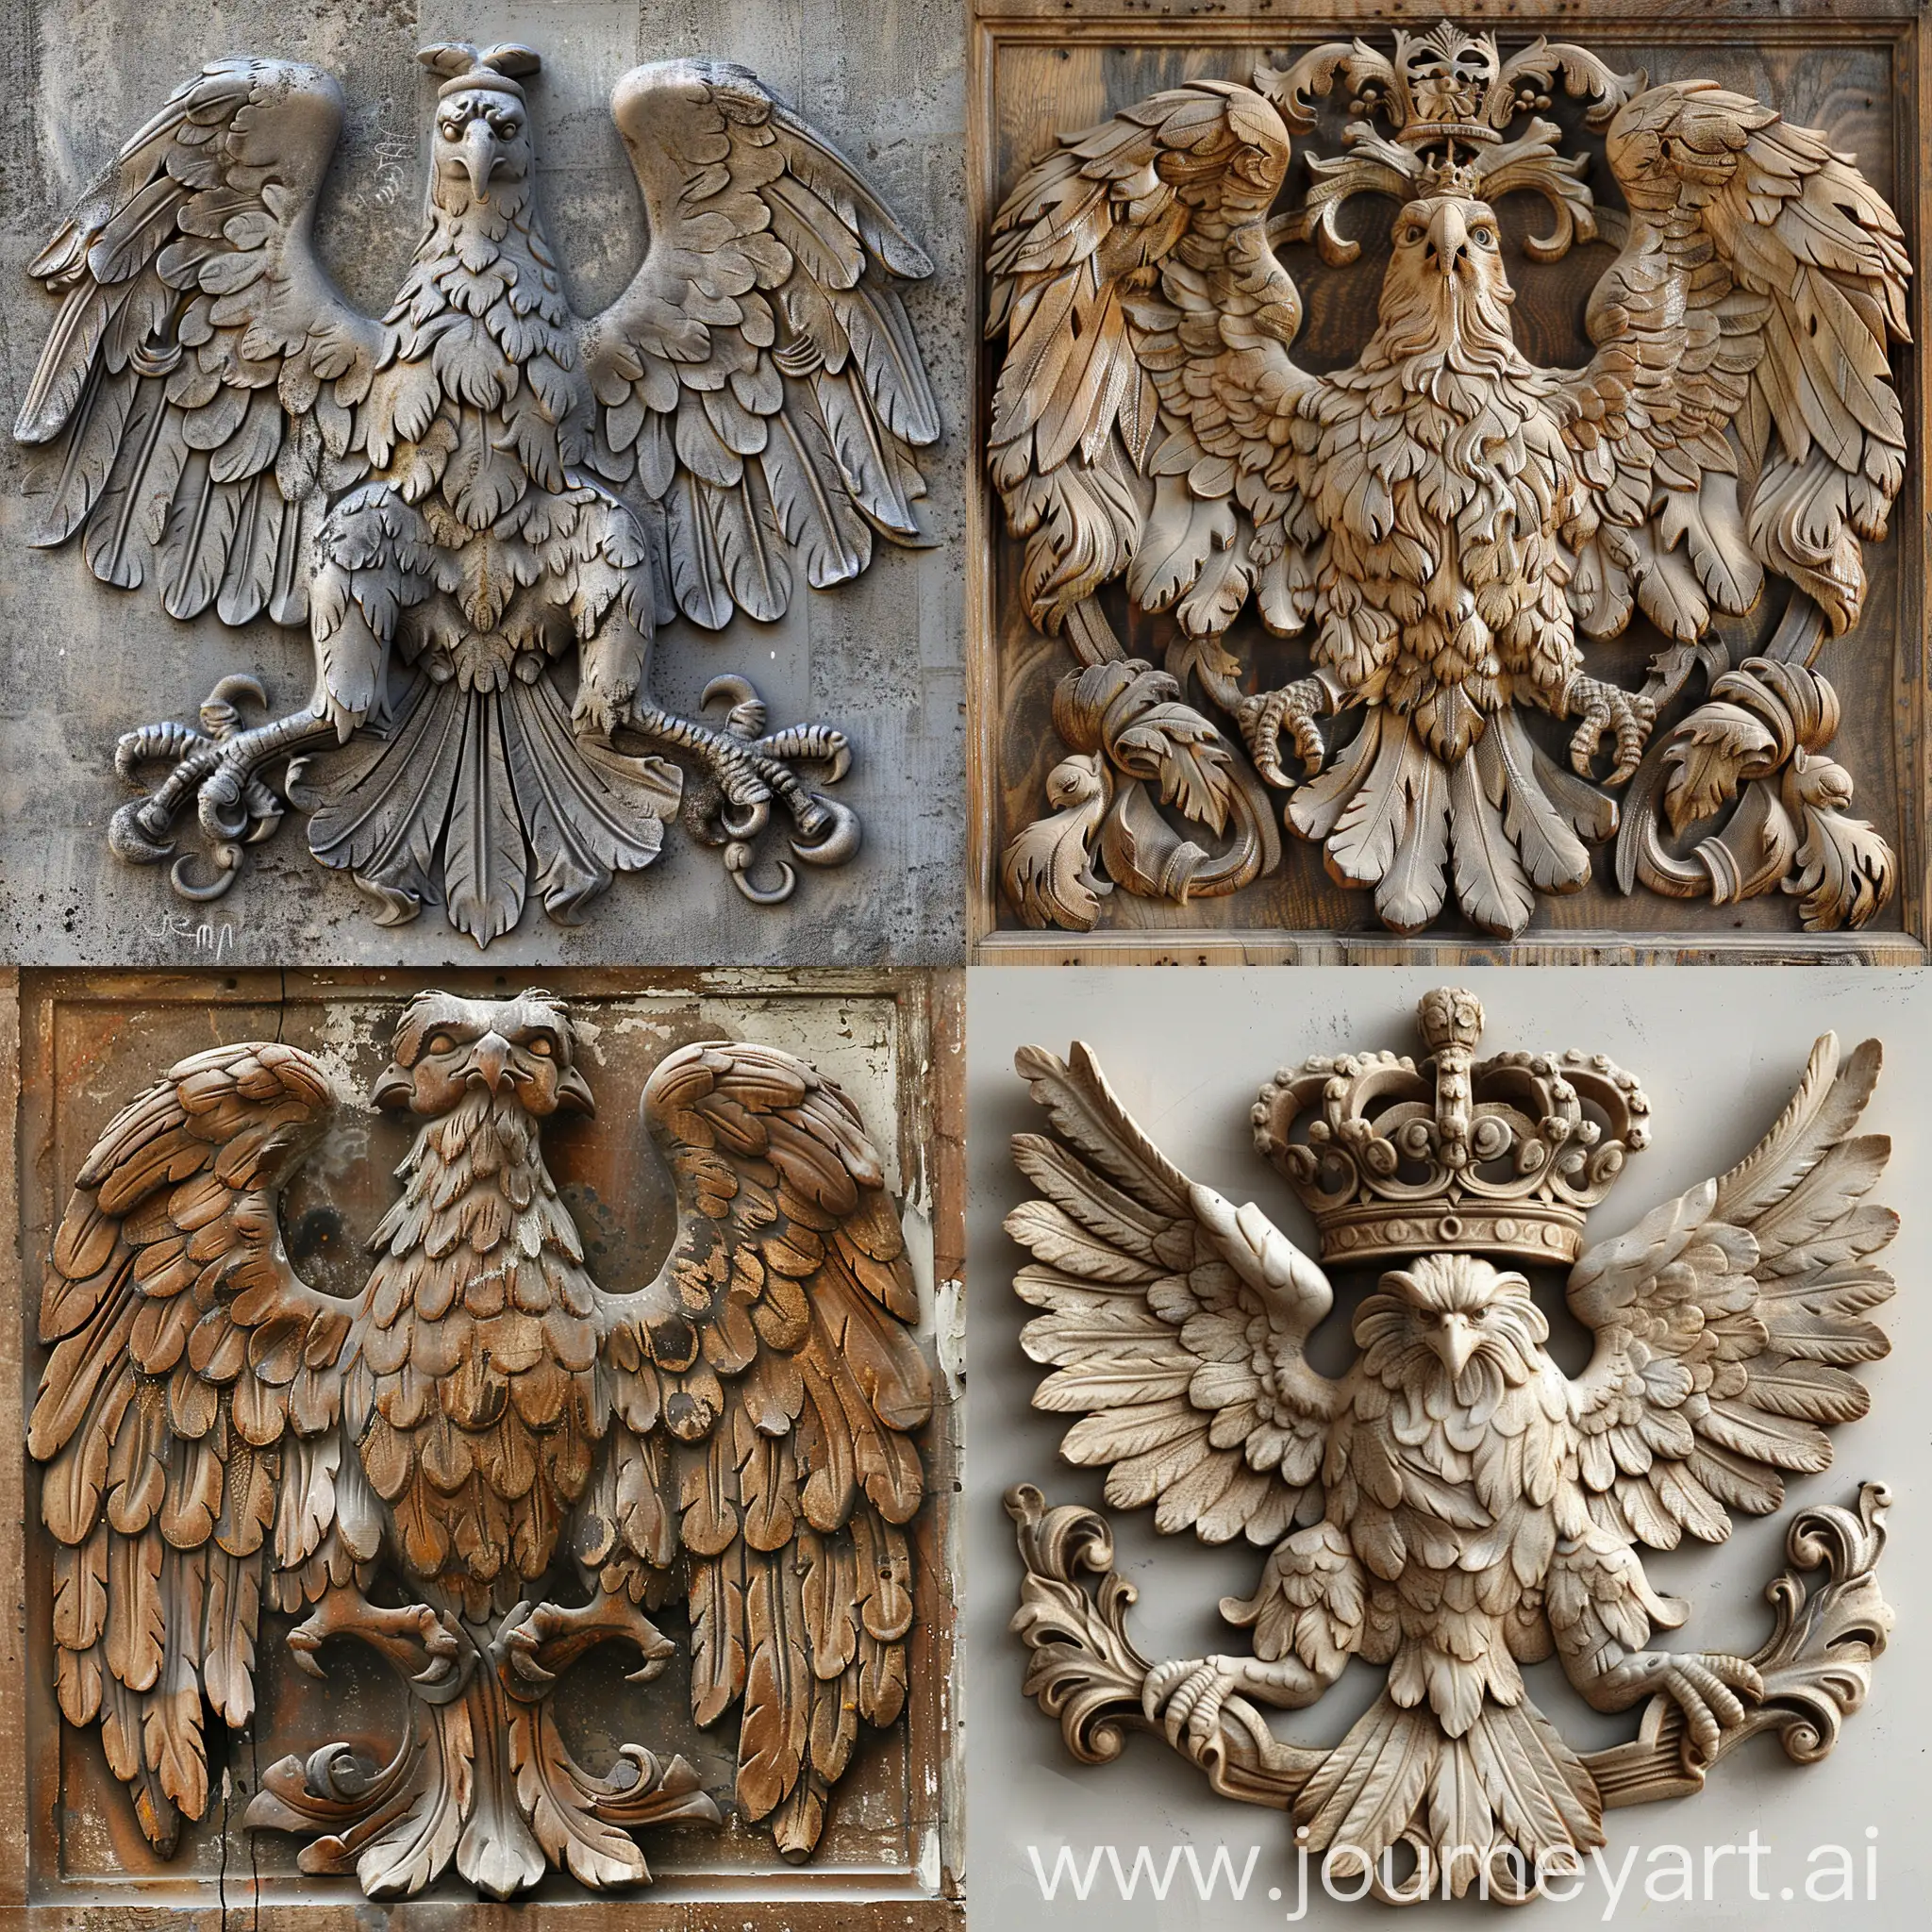 A relief of a double headed eagle on a coat of arms